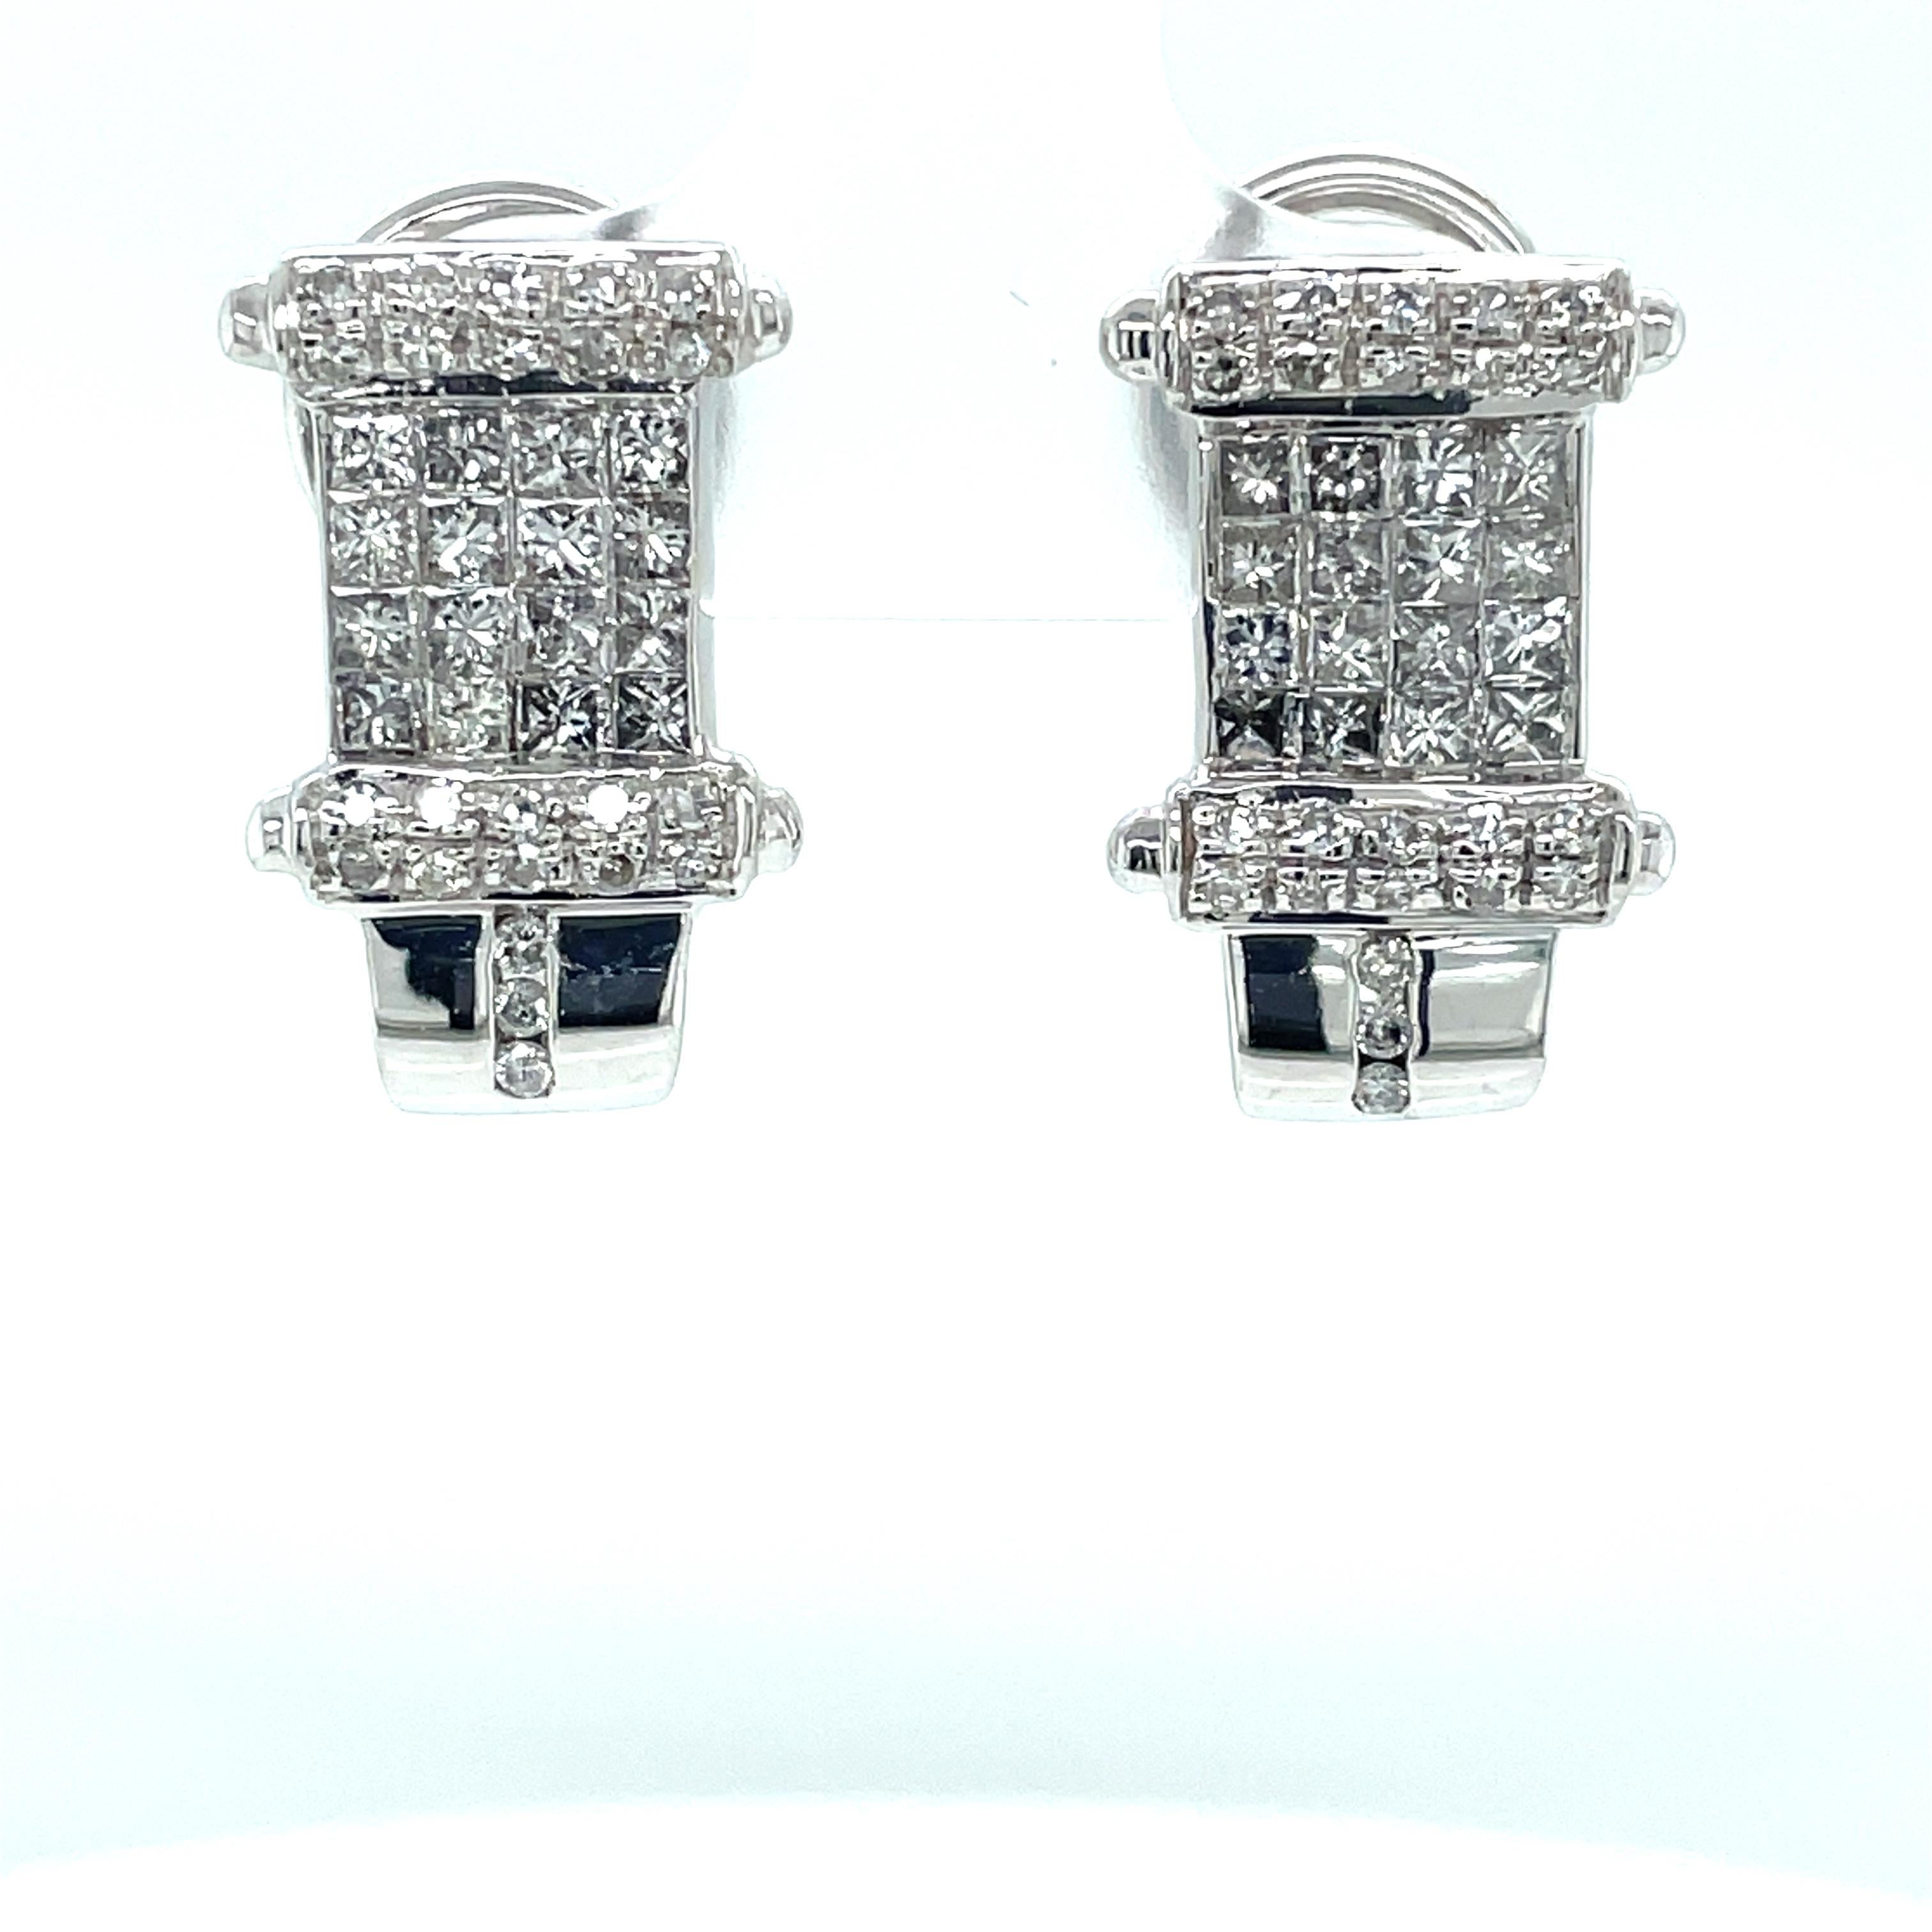 Diamonds glisten on this unique column-shaped 14 karat white gold earring pair. Thirty two sparkling square cut 1.3 x 1.3 mm diamonds are accented by another forty six 1 mm diamond enhancements, 2.29 total carat weight of H/ SI1 diamonds. The